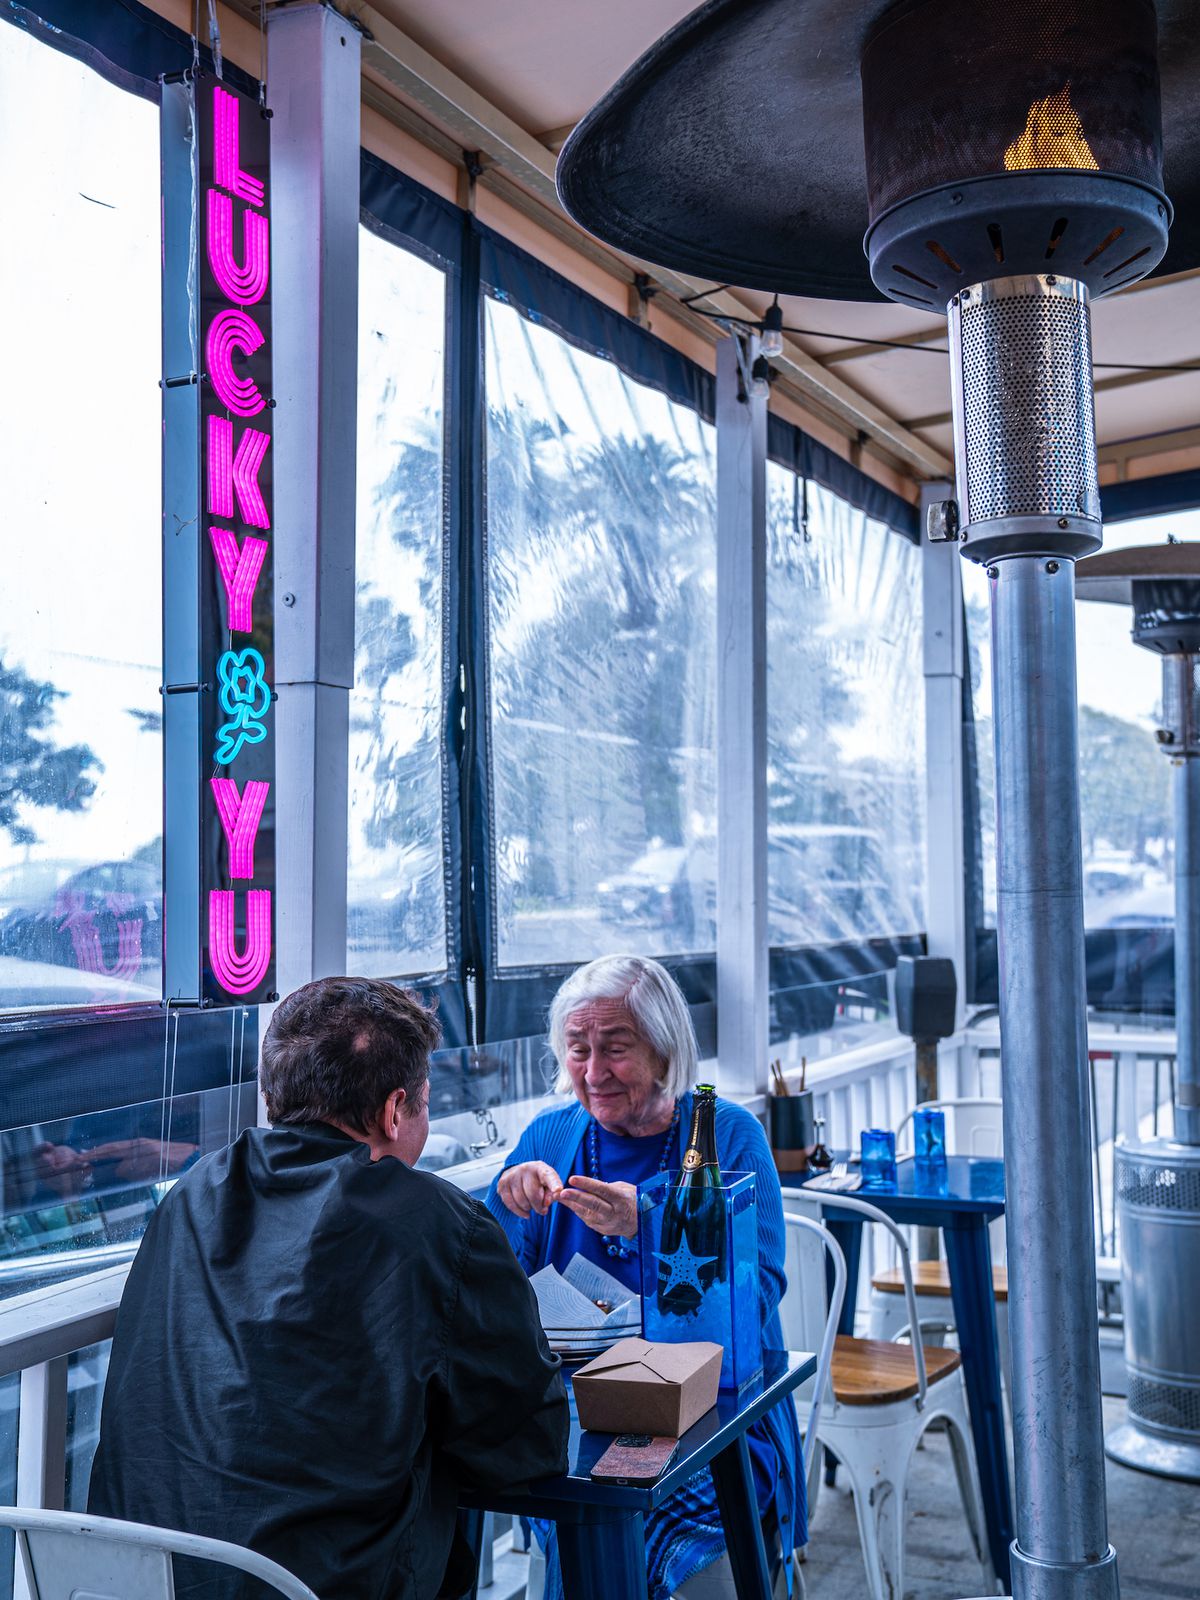 Two customers sit beneath a neon sign and next to a rain protector at a stormy daytime seafood restaurant.